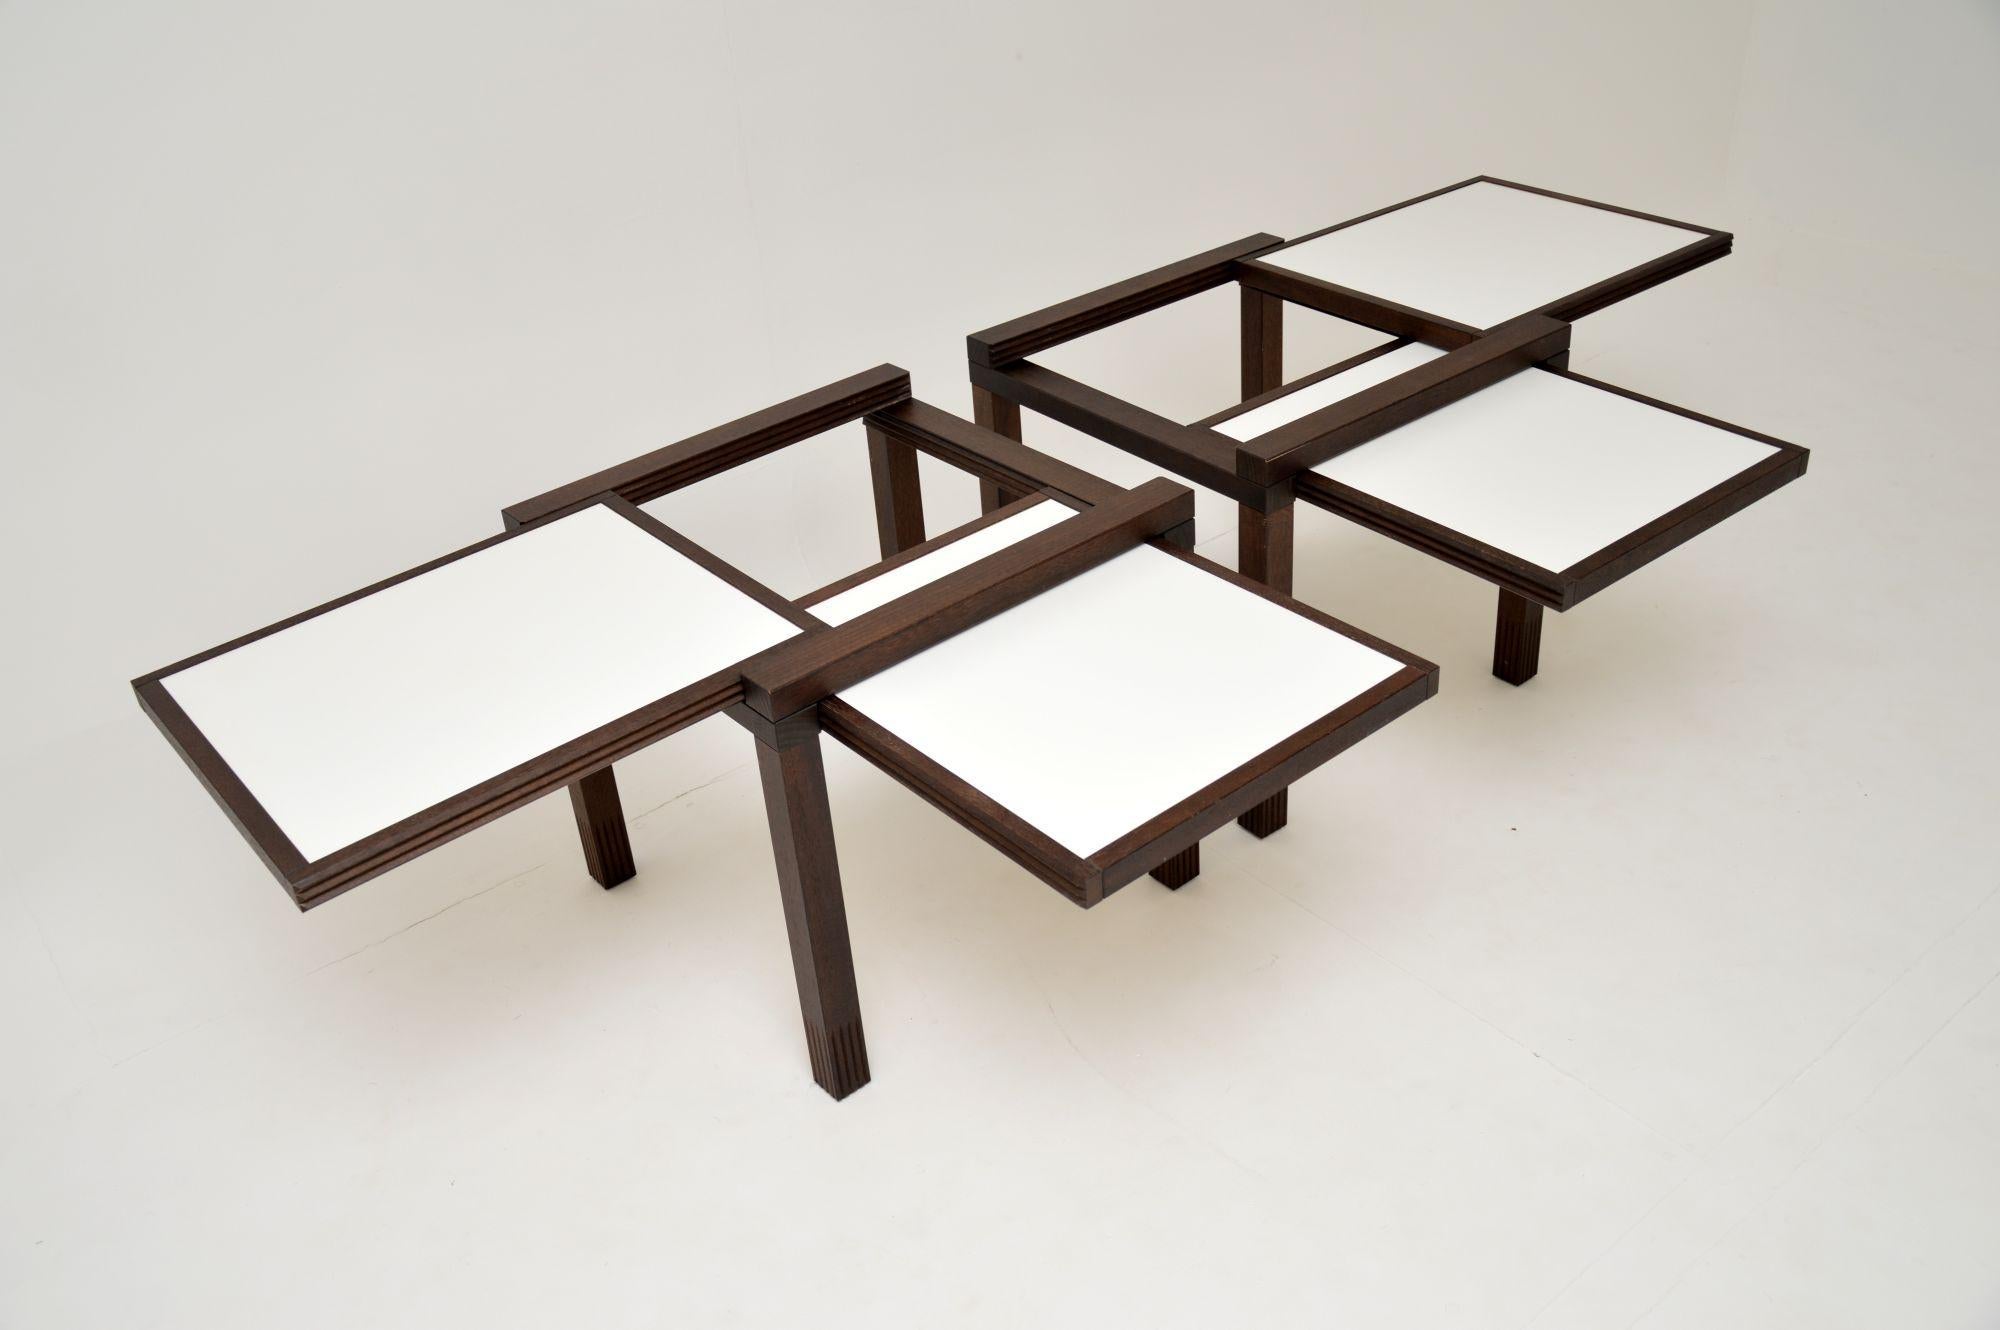 20th Century Pair of Hexa Side Tables by Bernard Vuarnesson for Bellato